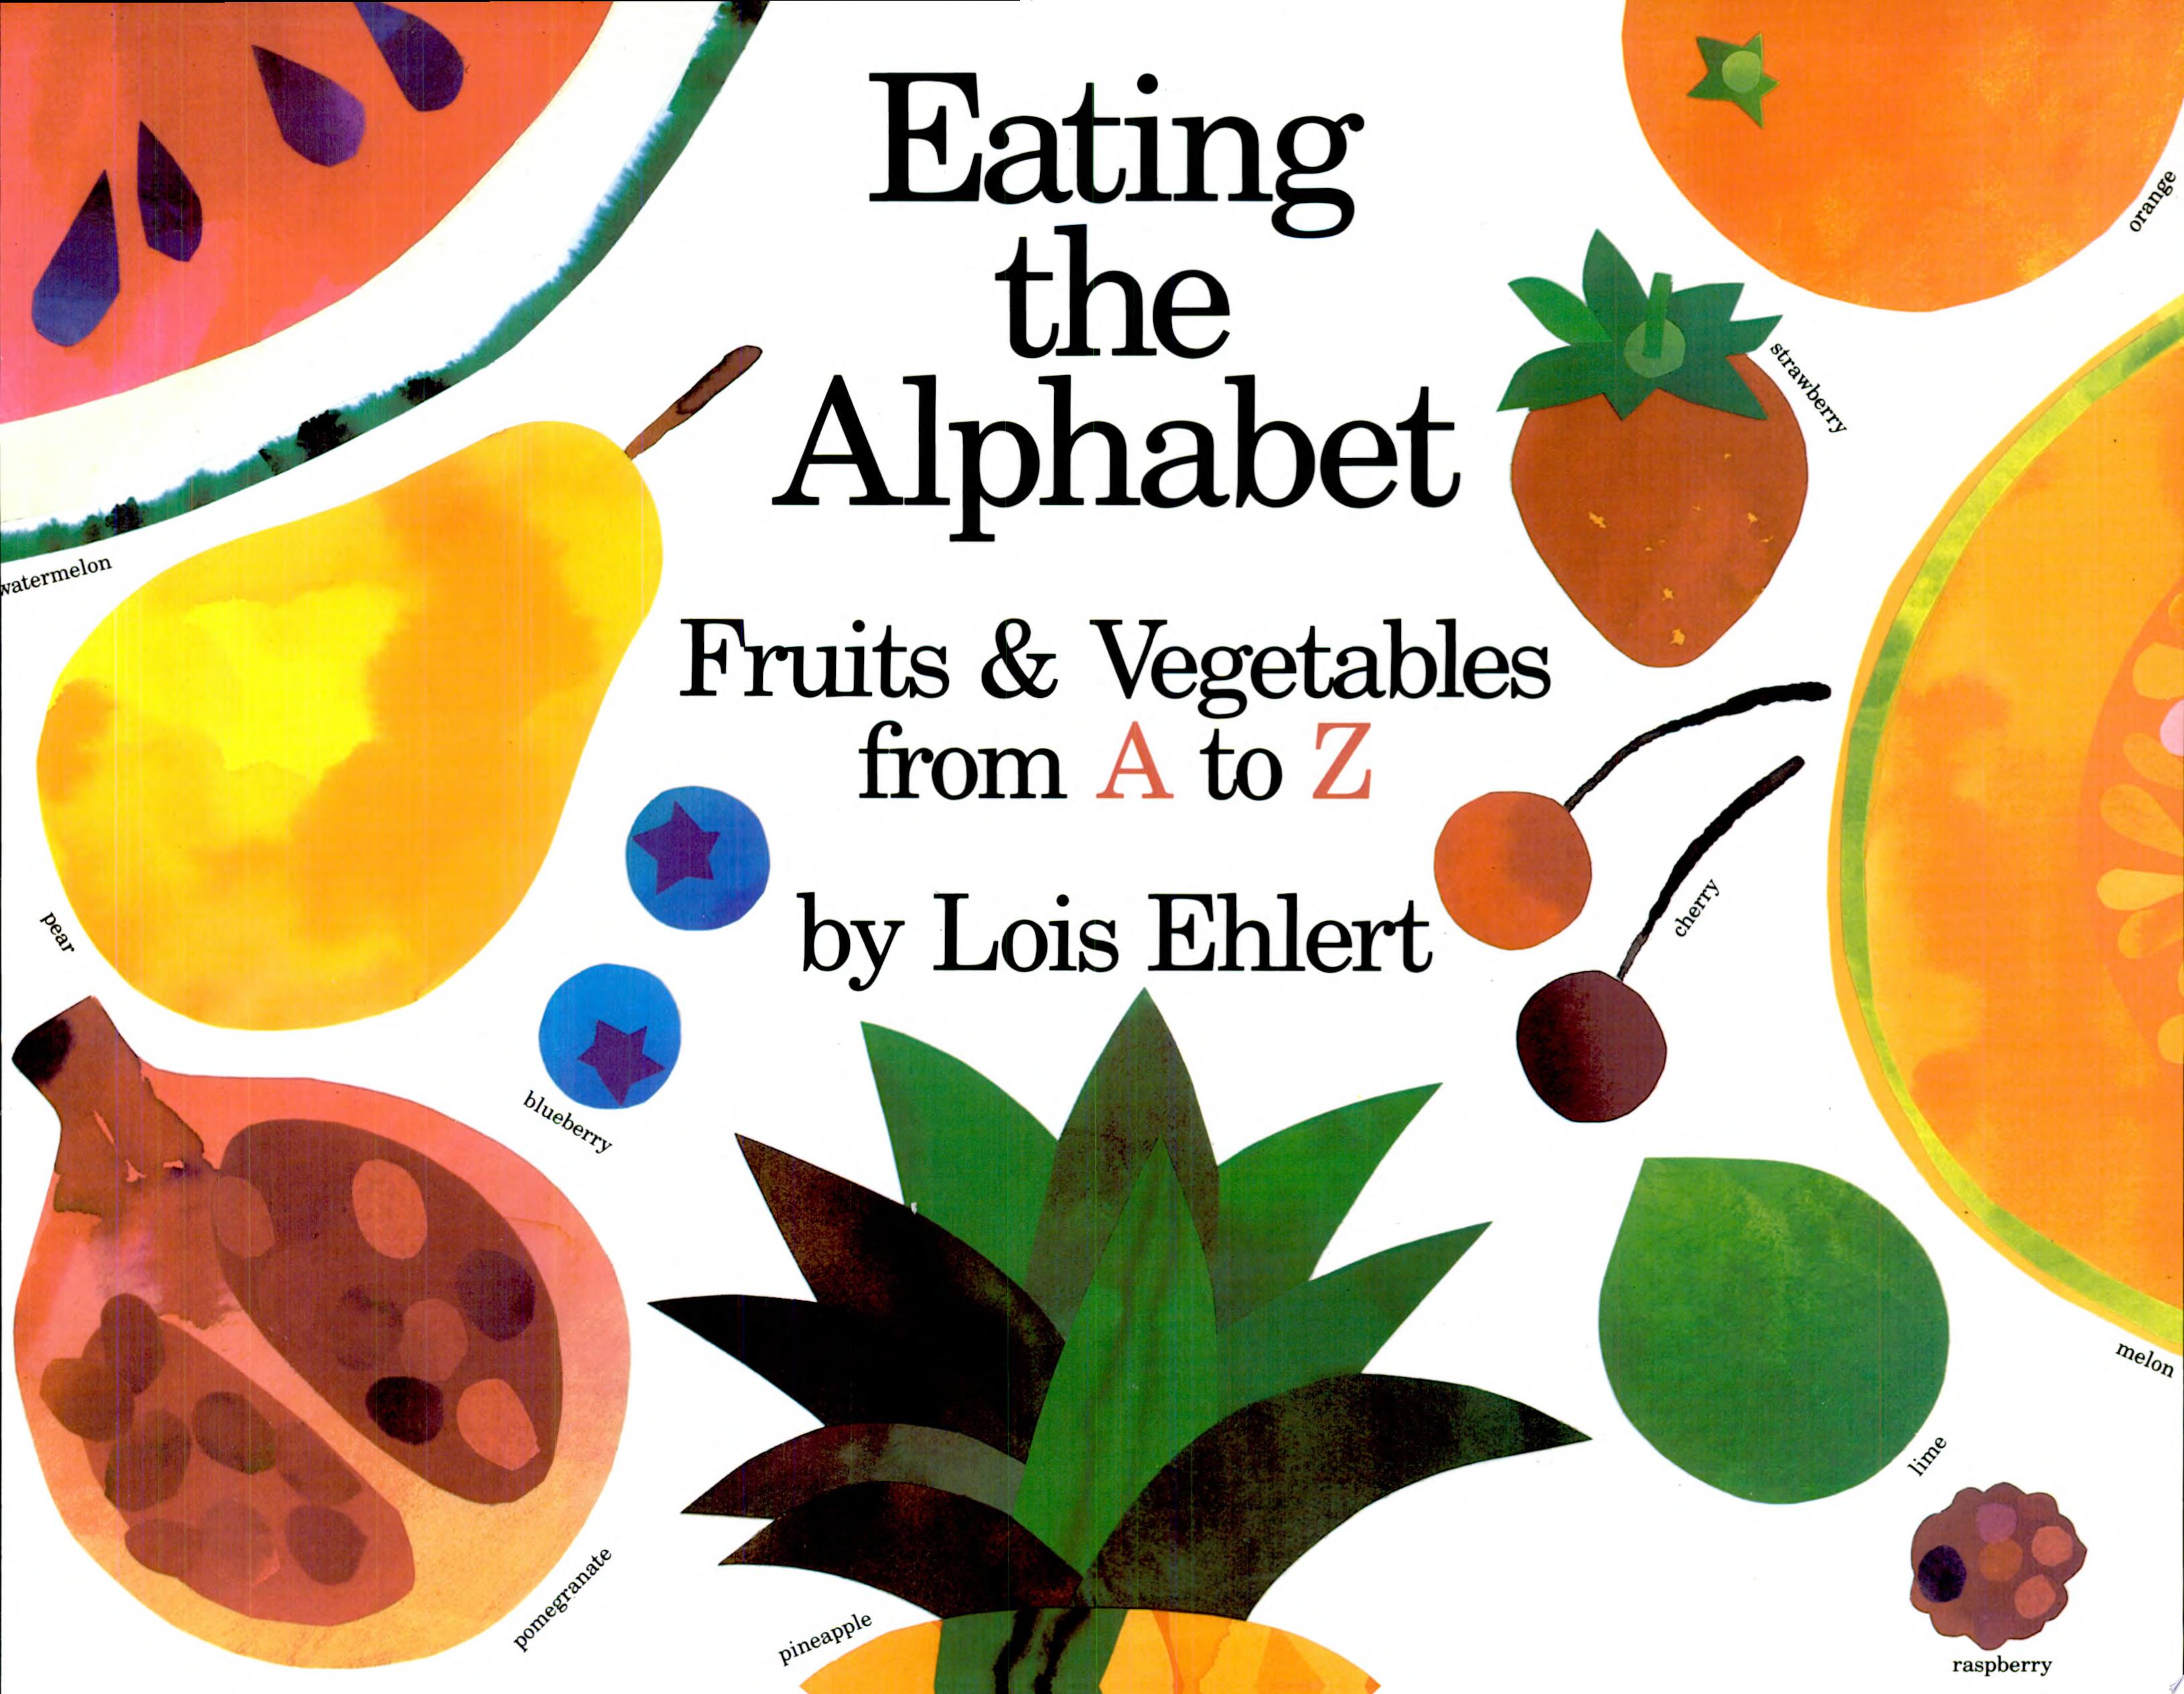 Image for "Eating the Alphabet"